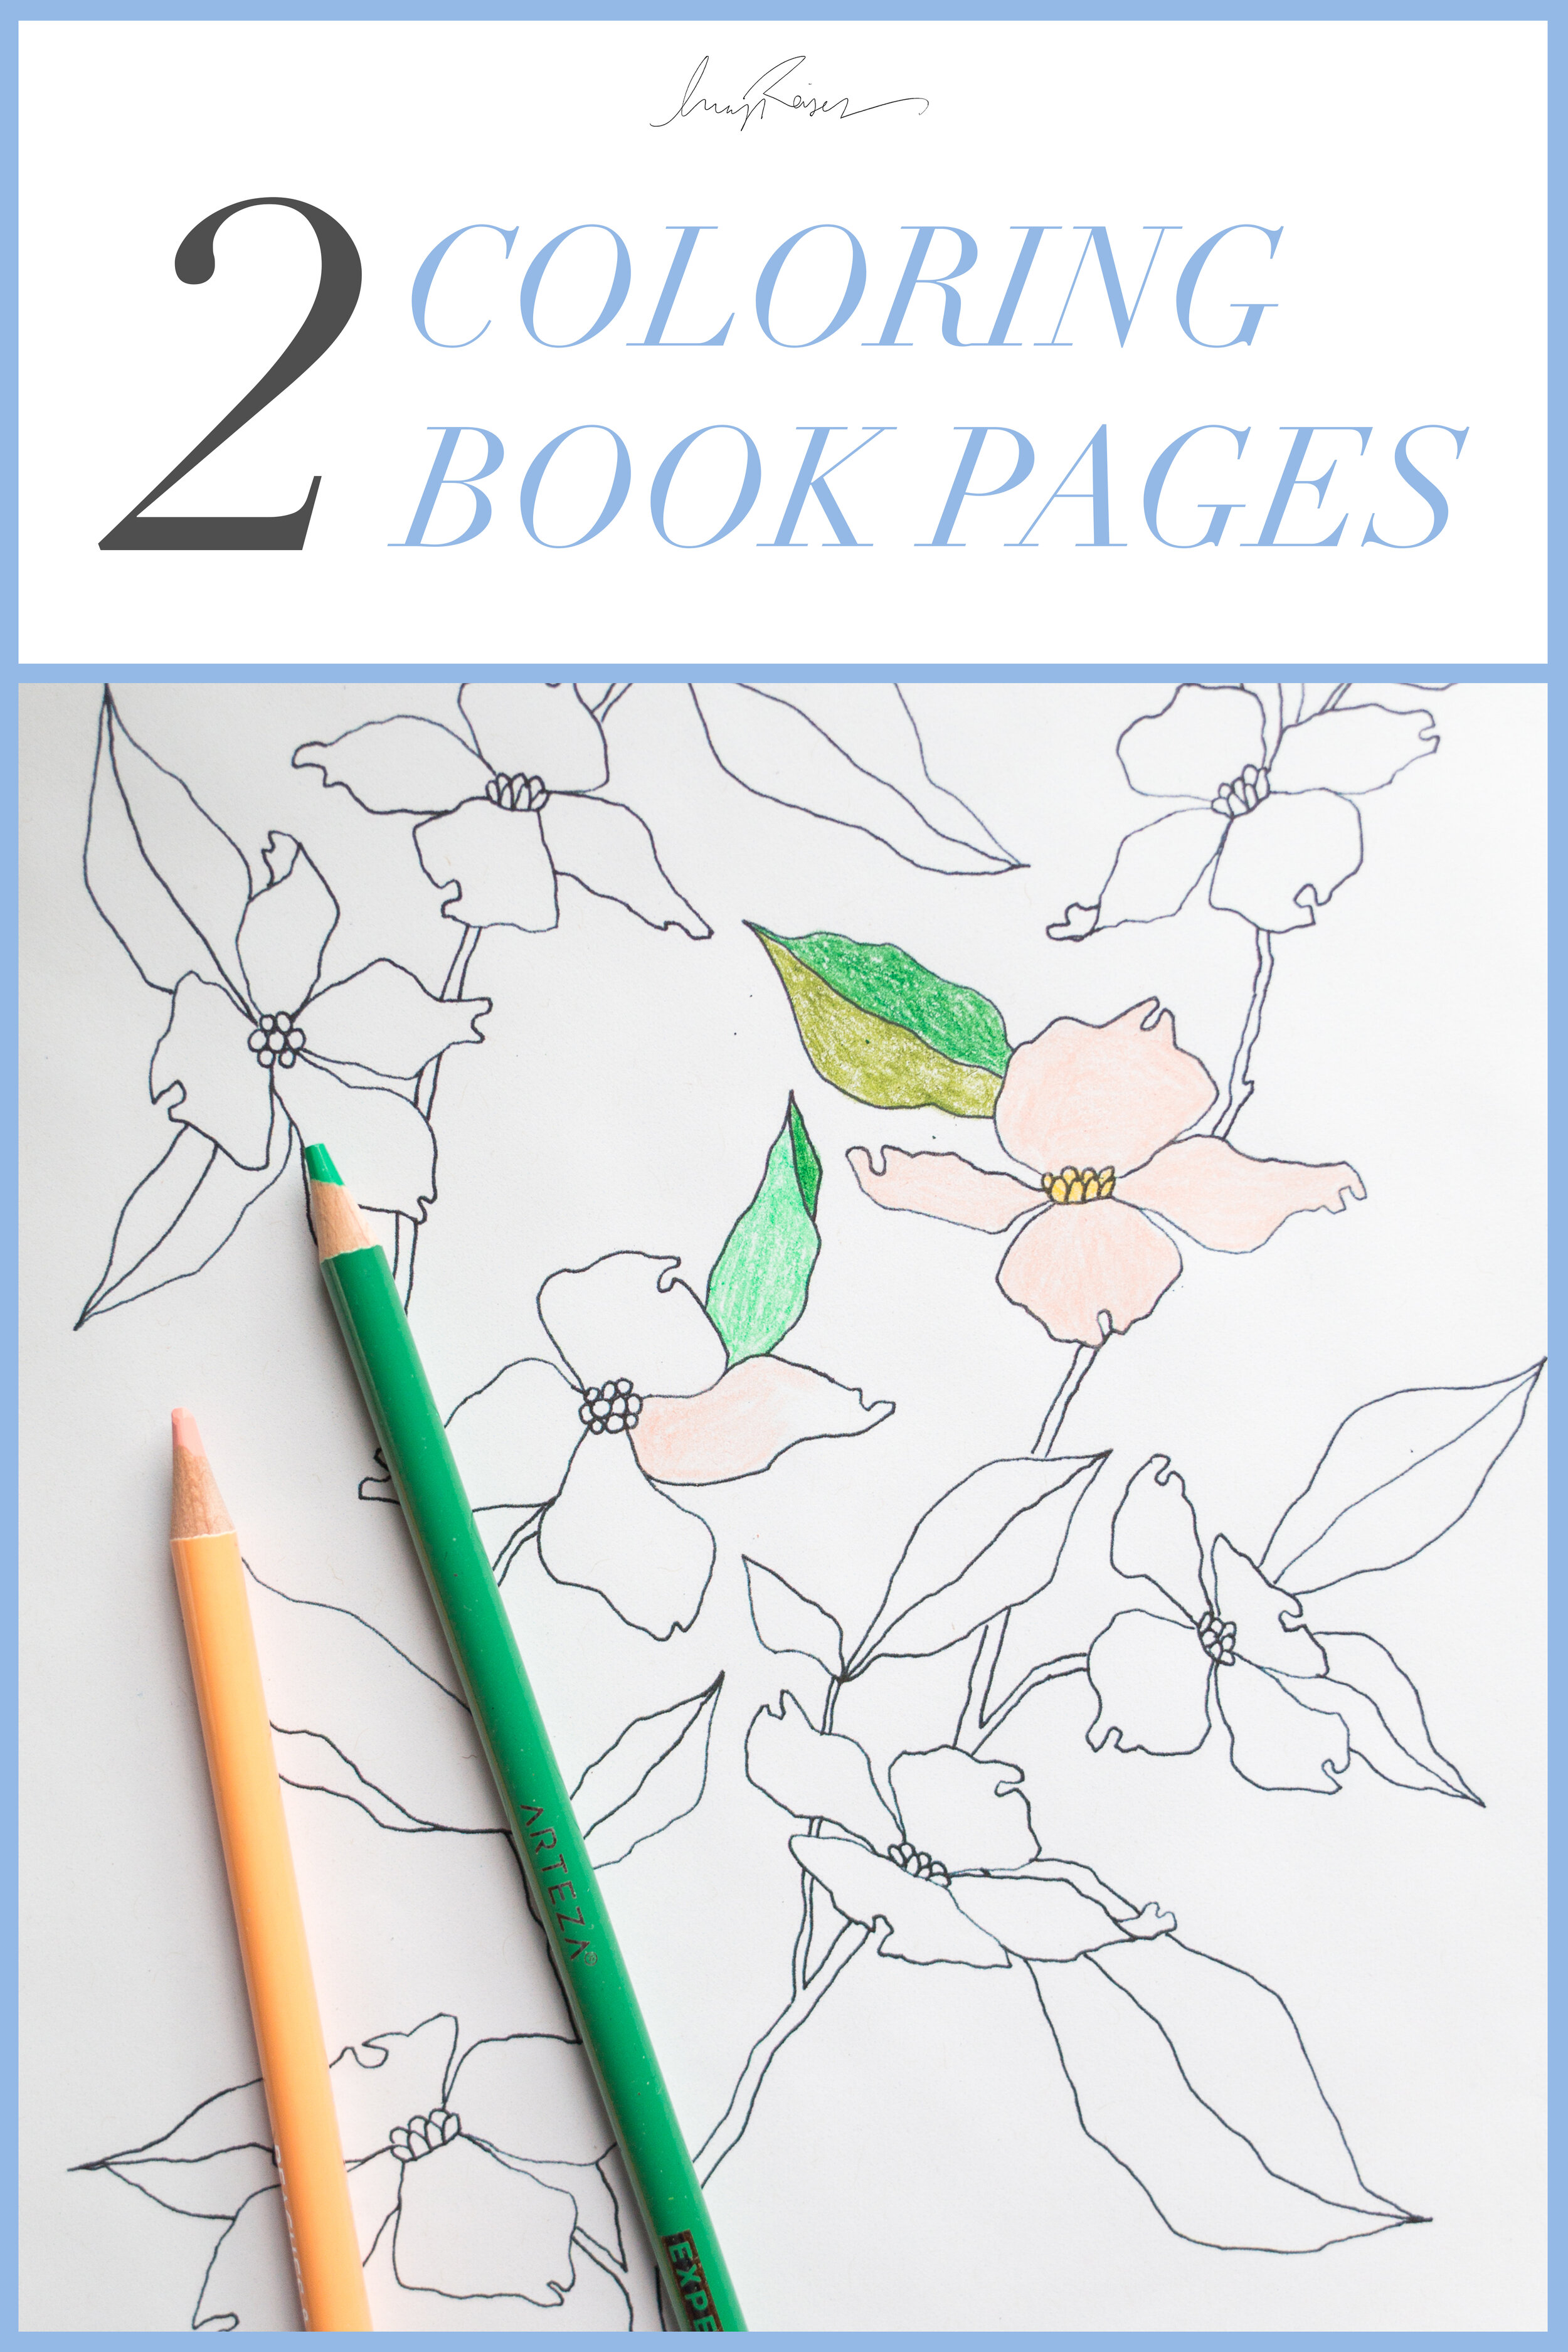 2coloringbookpagescover.jpg